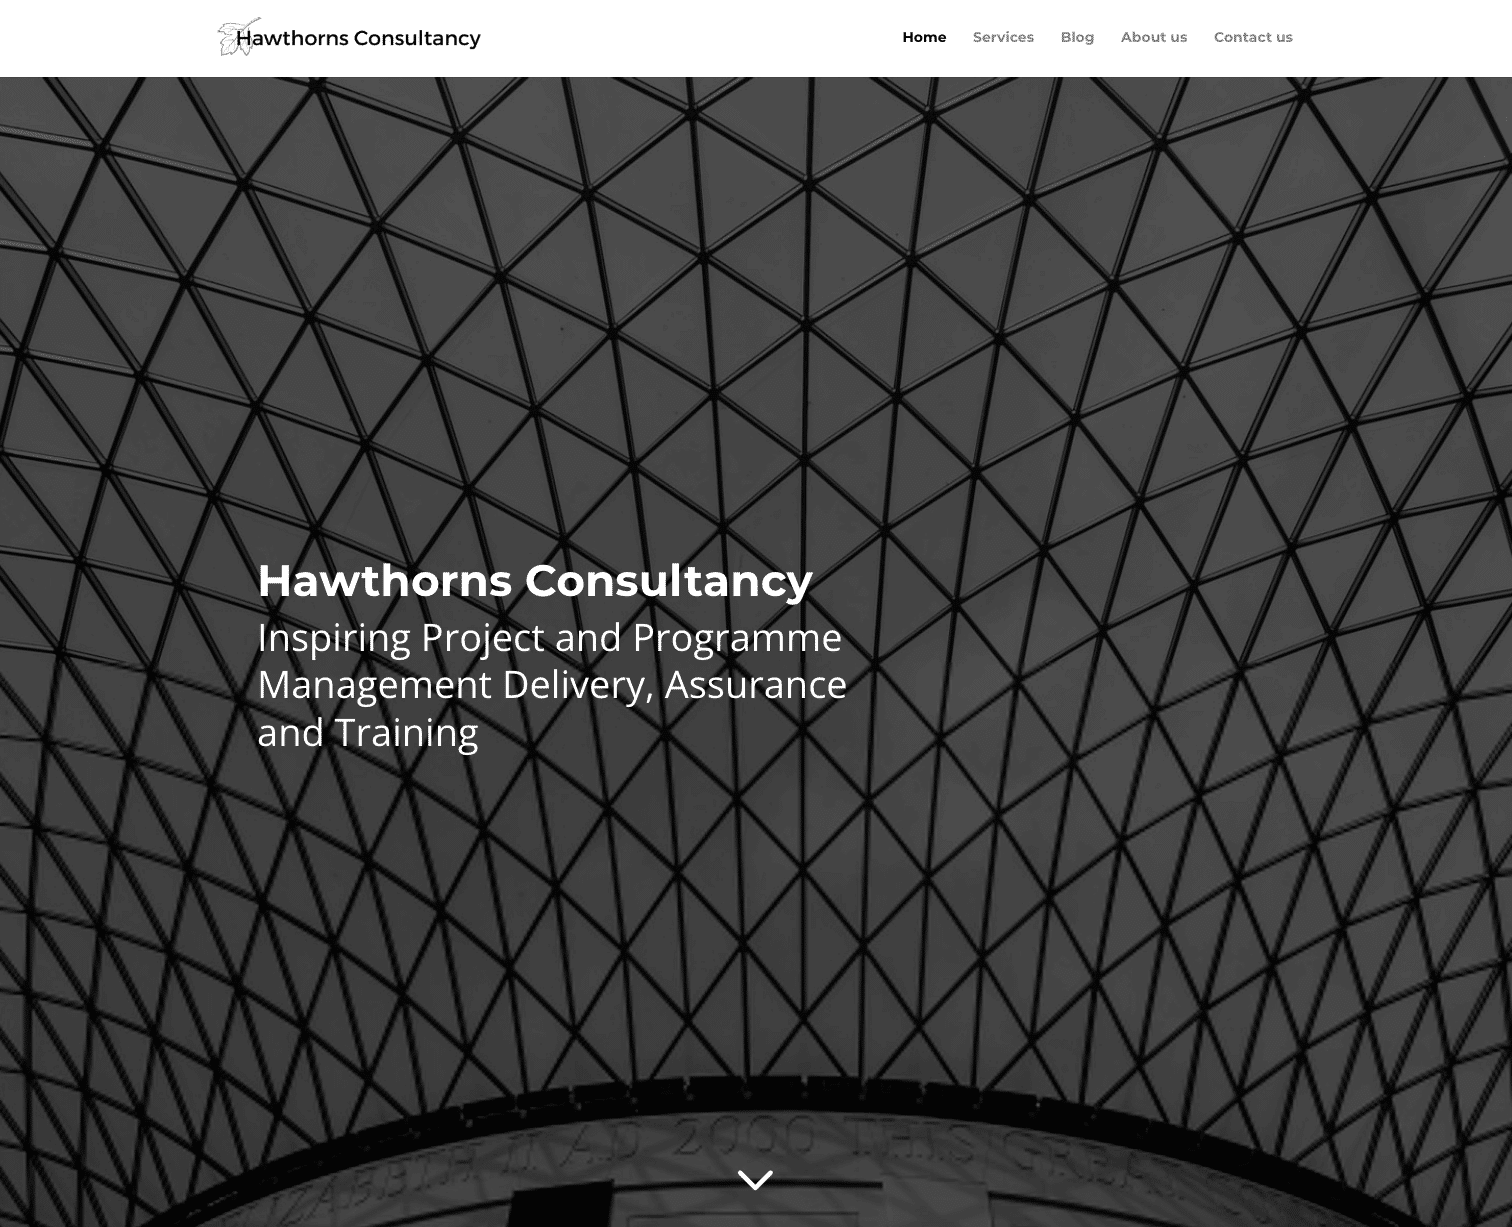 Hawthorns Consultancy Home Page